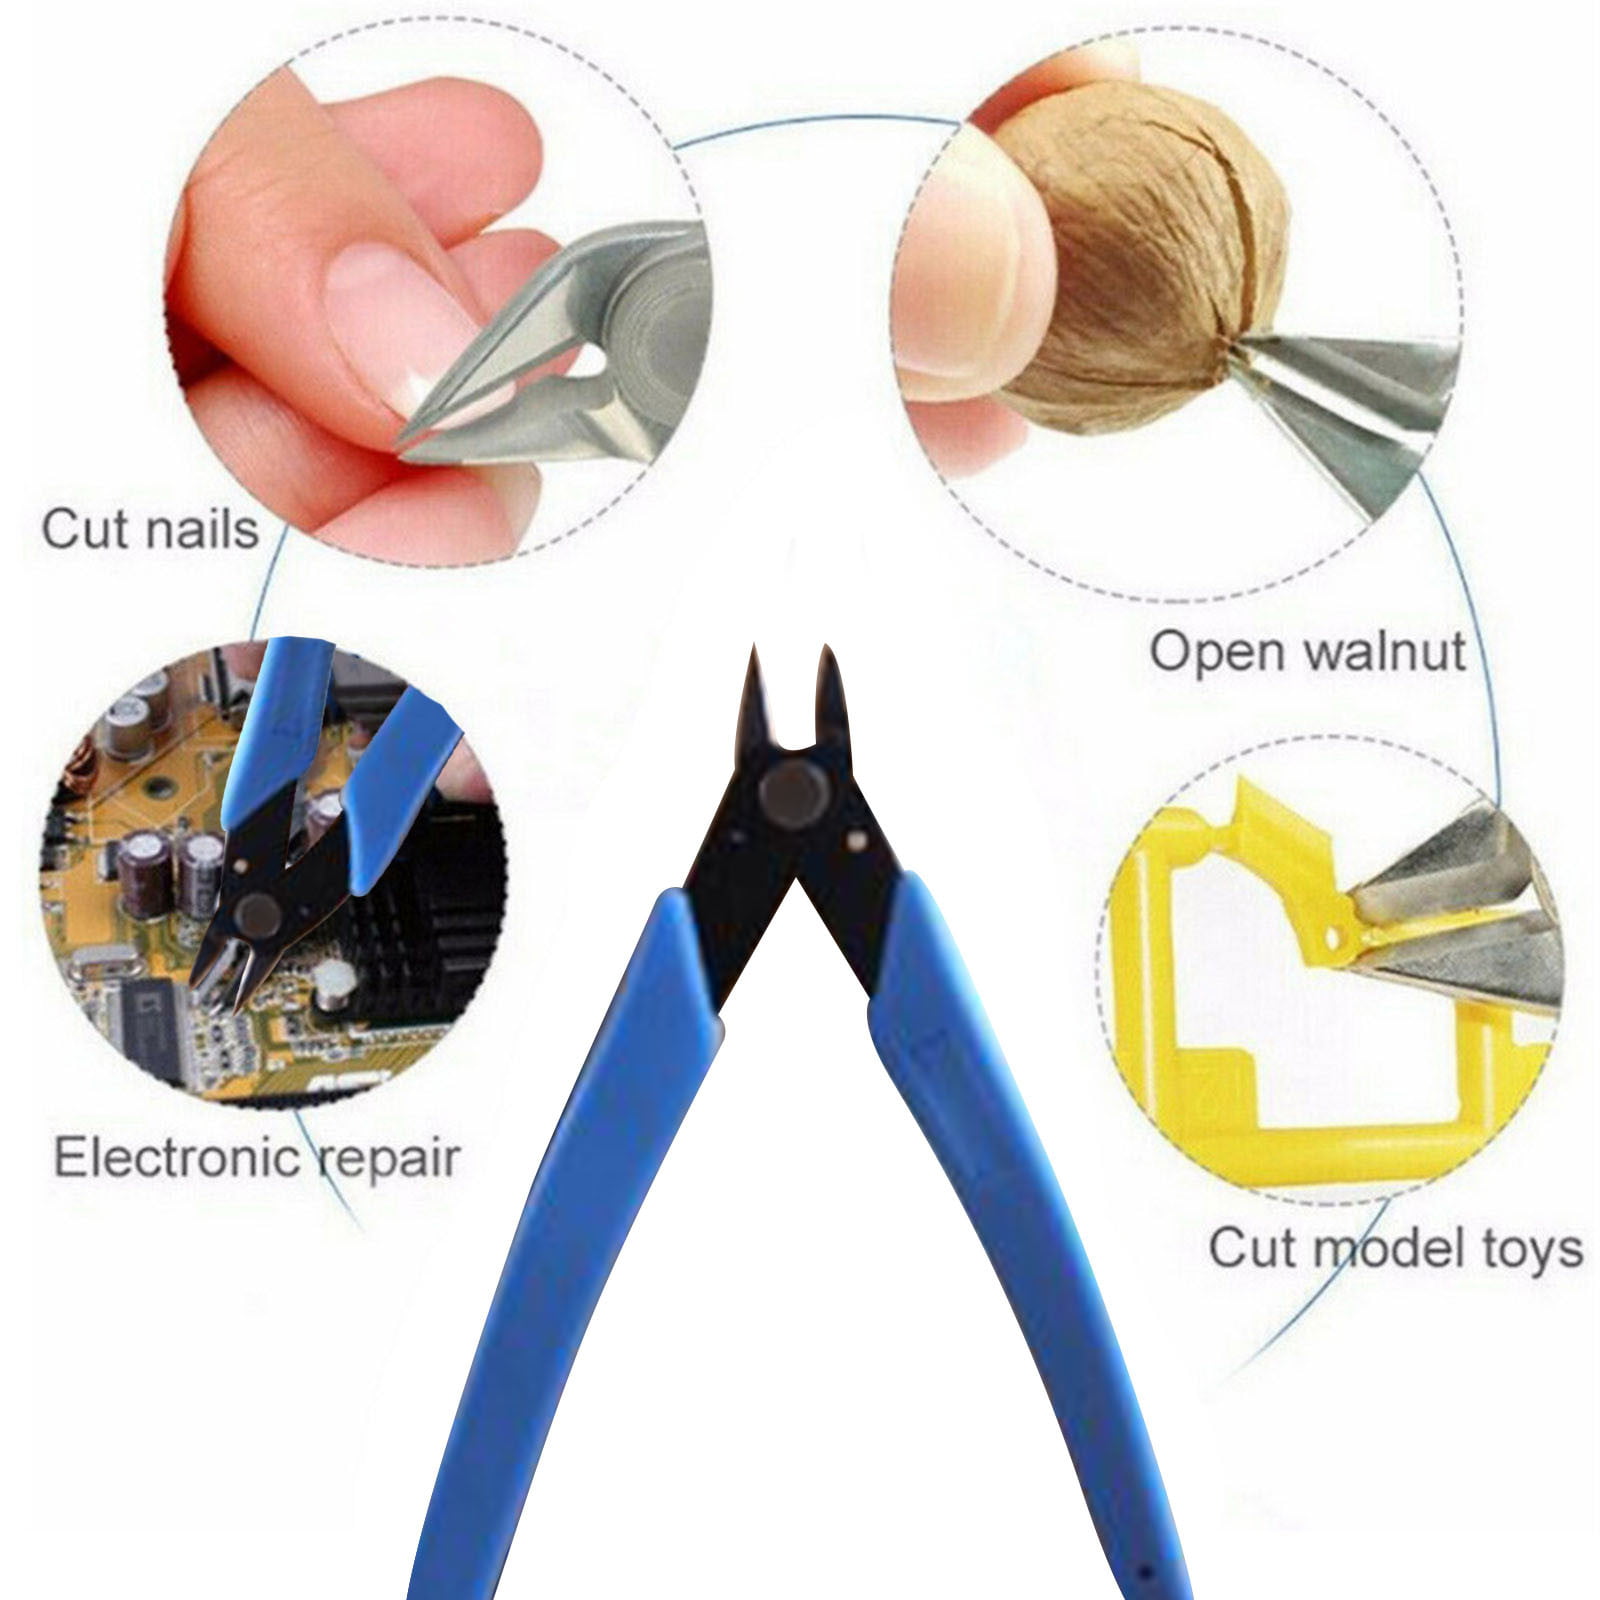 Thsue 5 Inch Side Cutting Nippers Wire Cutters Nozzle Pliers for Crafting  Electrical Jewelry Making Precision Wire Cutter, Small Wire Cutter, Ultra  Sharp Wire Clippers, Wire Snips 